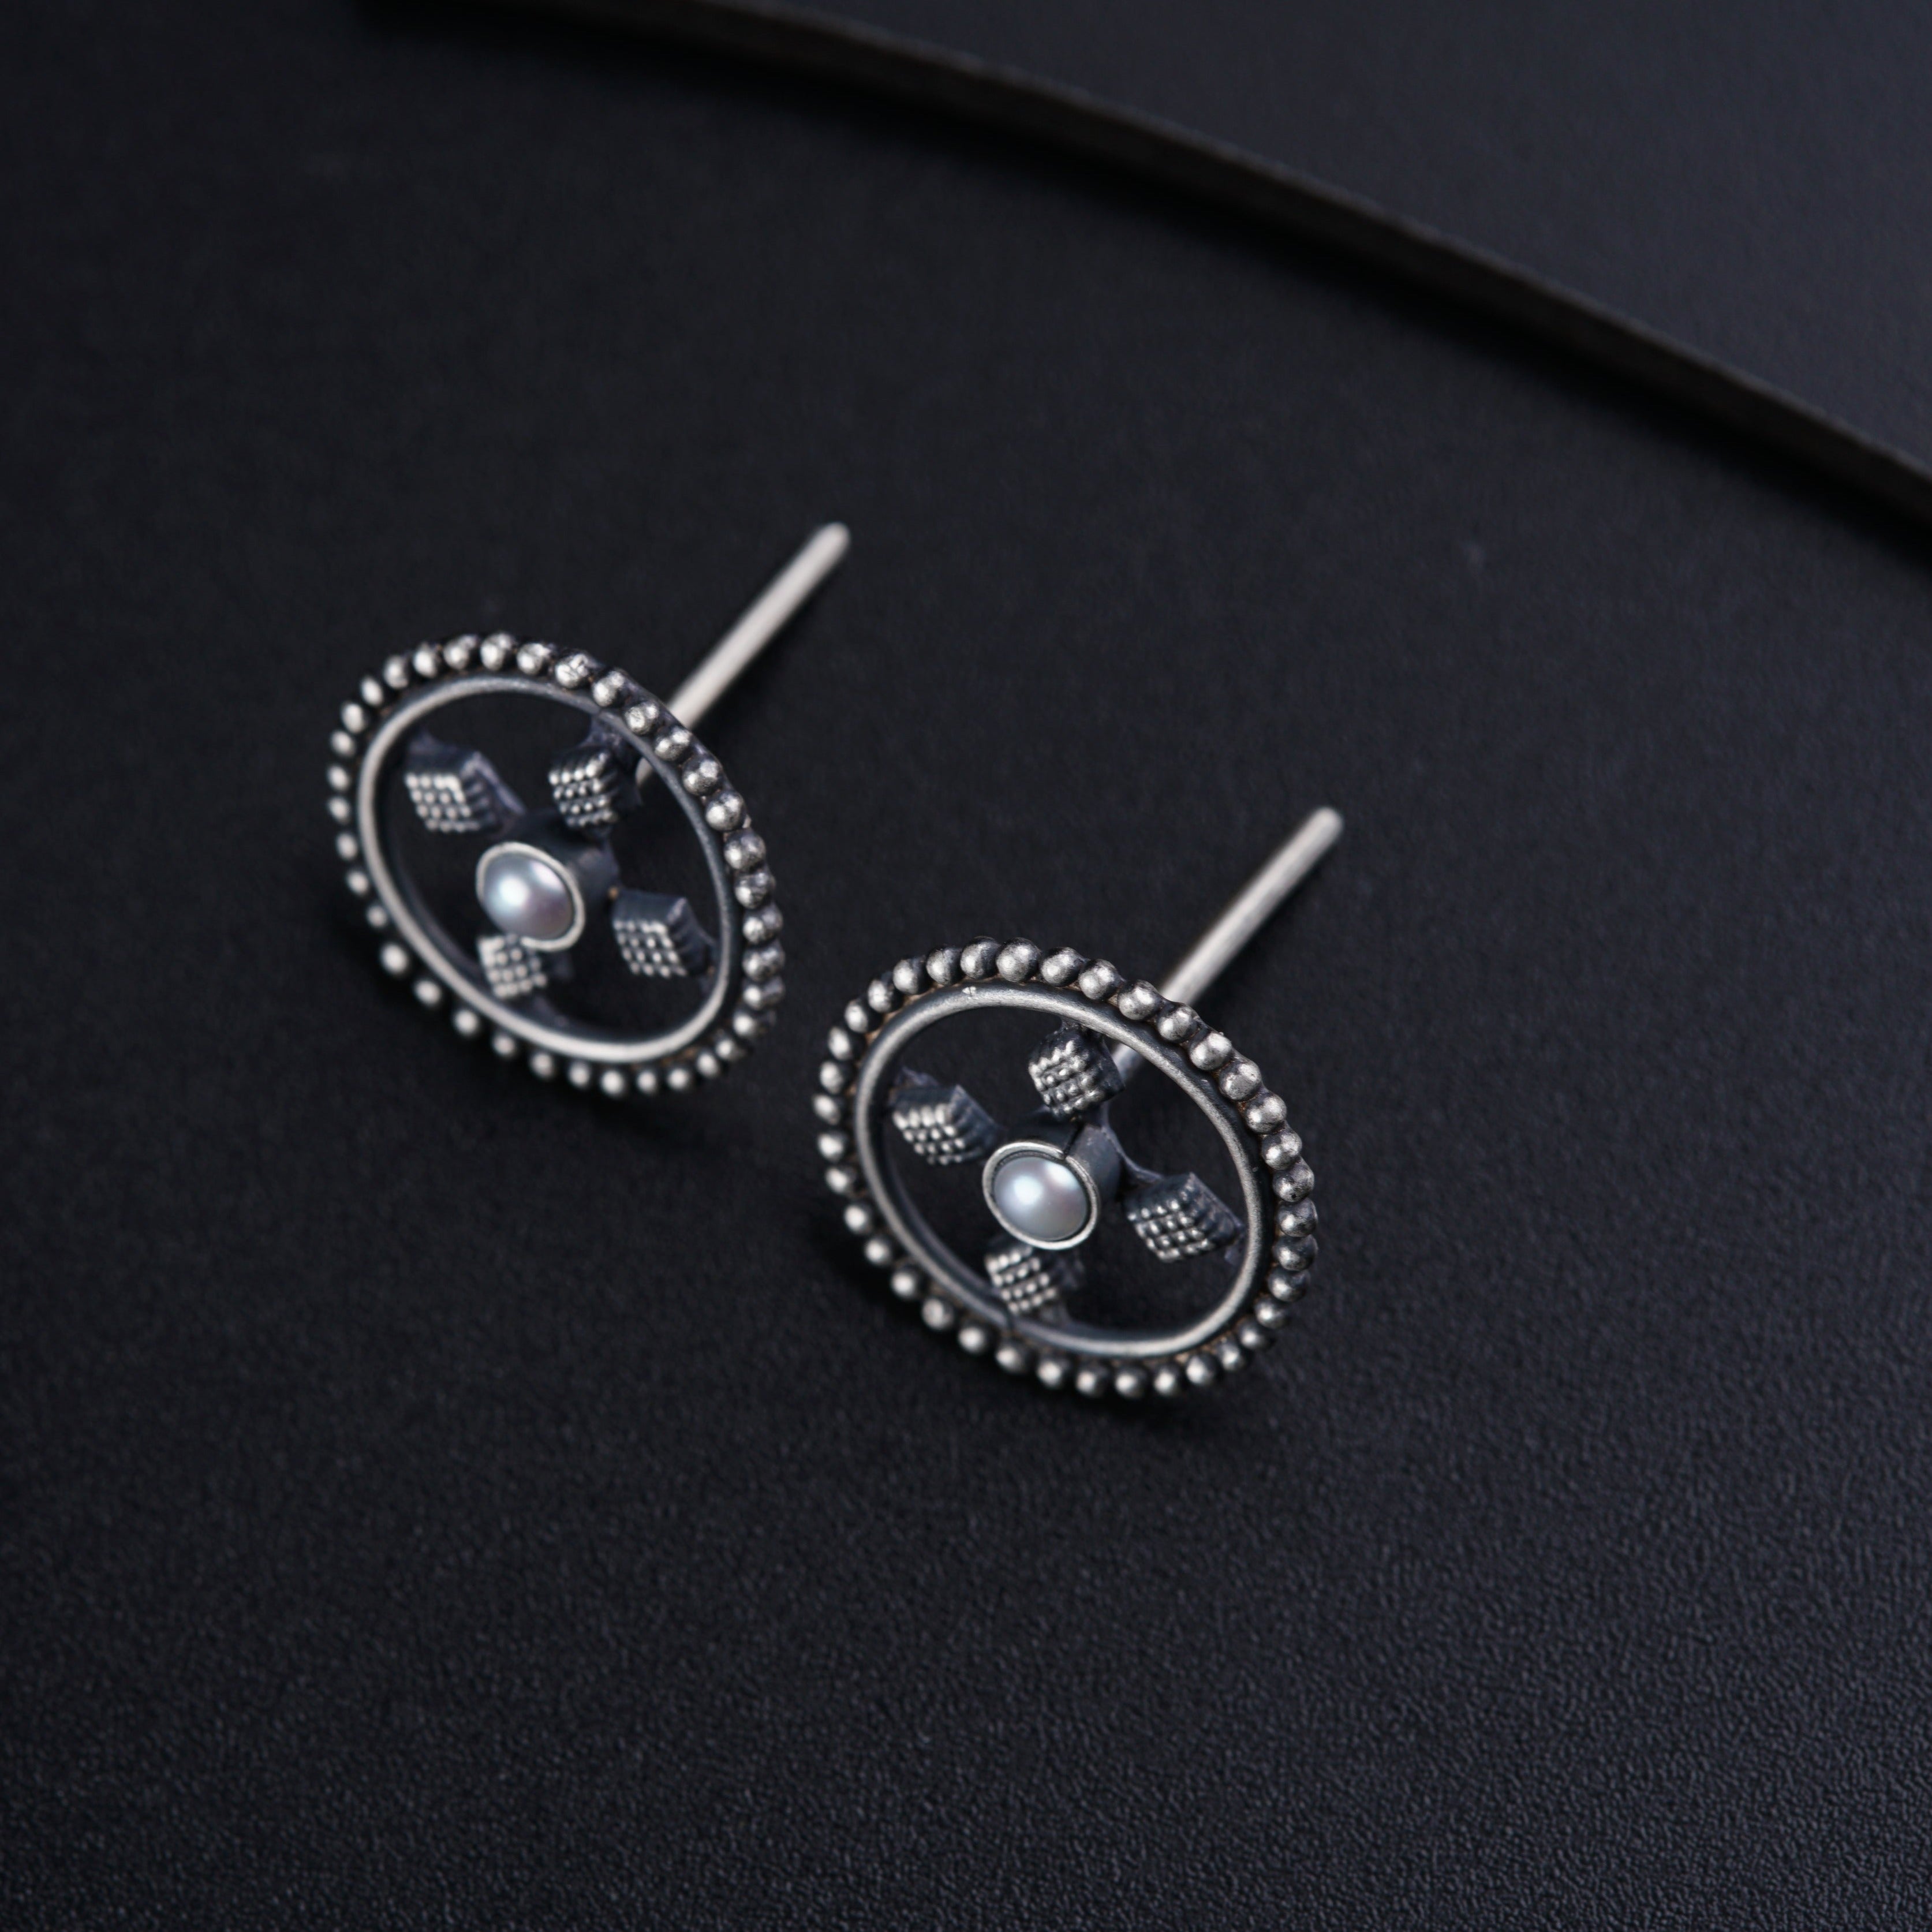 a pair of earrings on a black surface